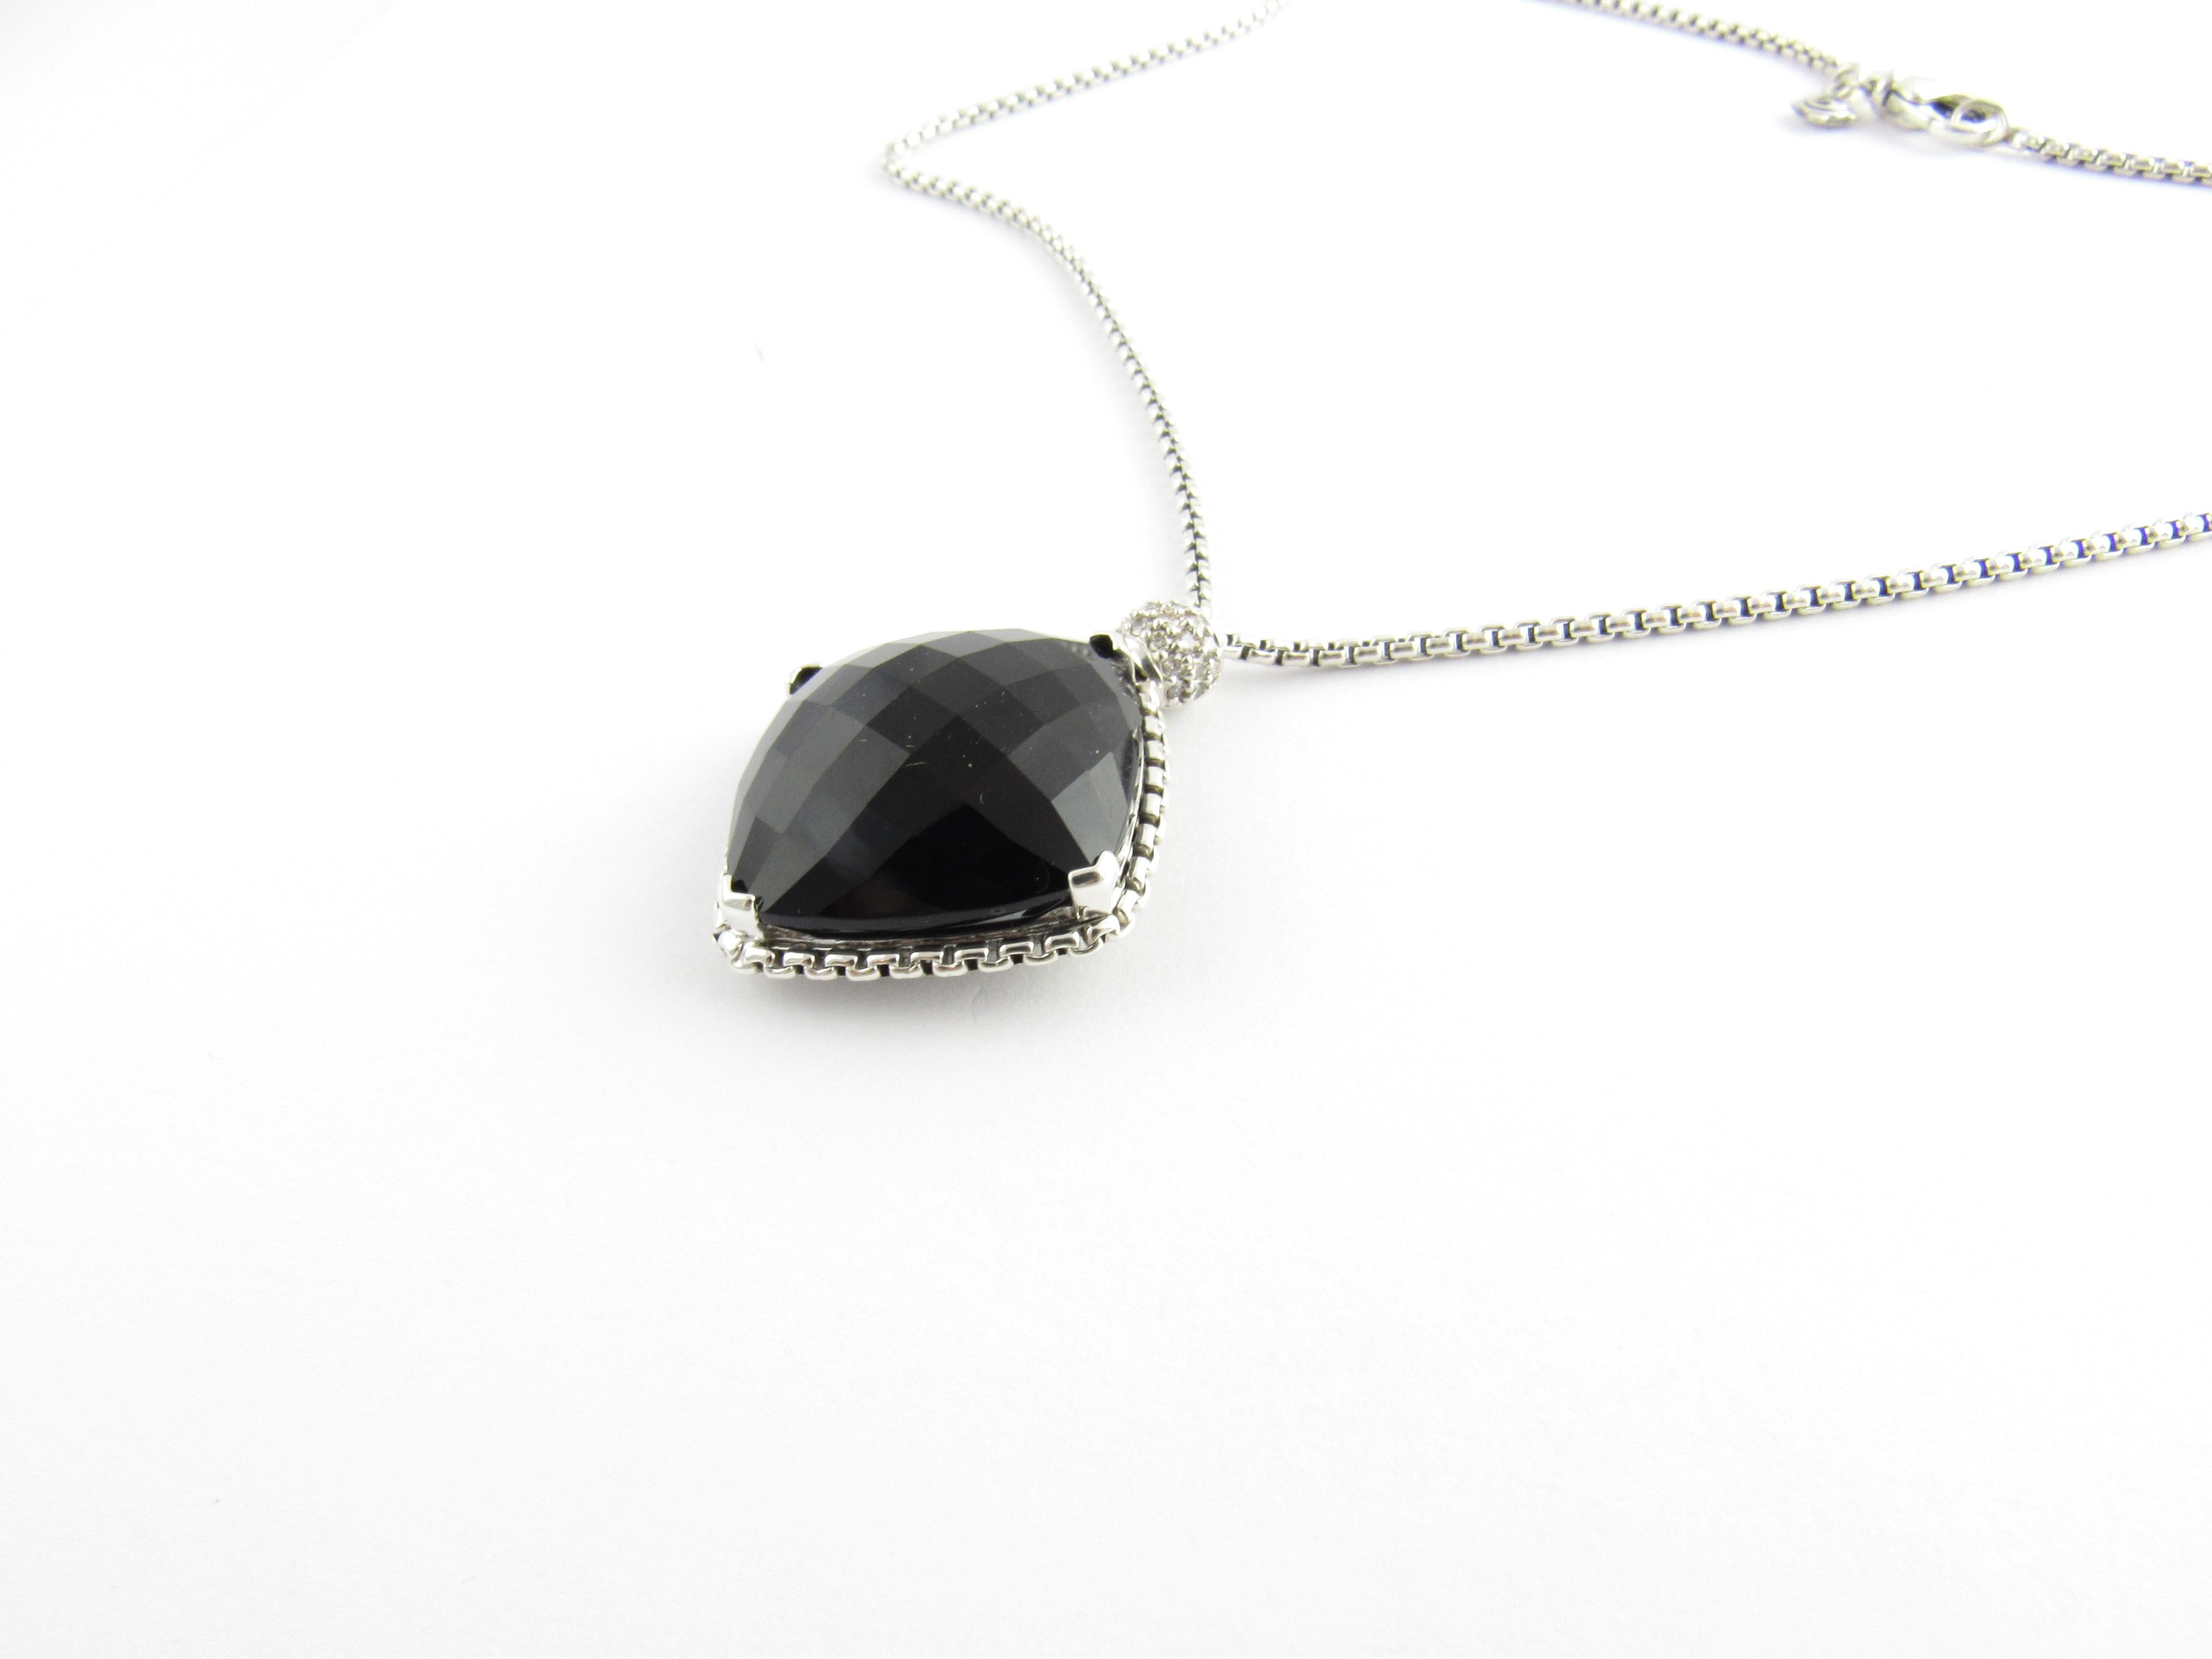 David Yurman Sterling Silver Black Onyx Diamond Cushion on Point Necklace

This authentic David Yurman necklace features a faceted cushion cut black onyx stone approx. 20mm x 20mm

Twisted cable setting

Pendant is on a DY baby box chain, 17